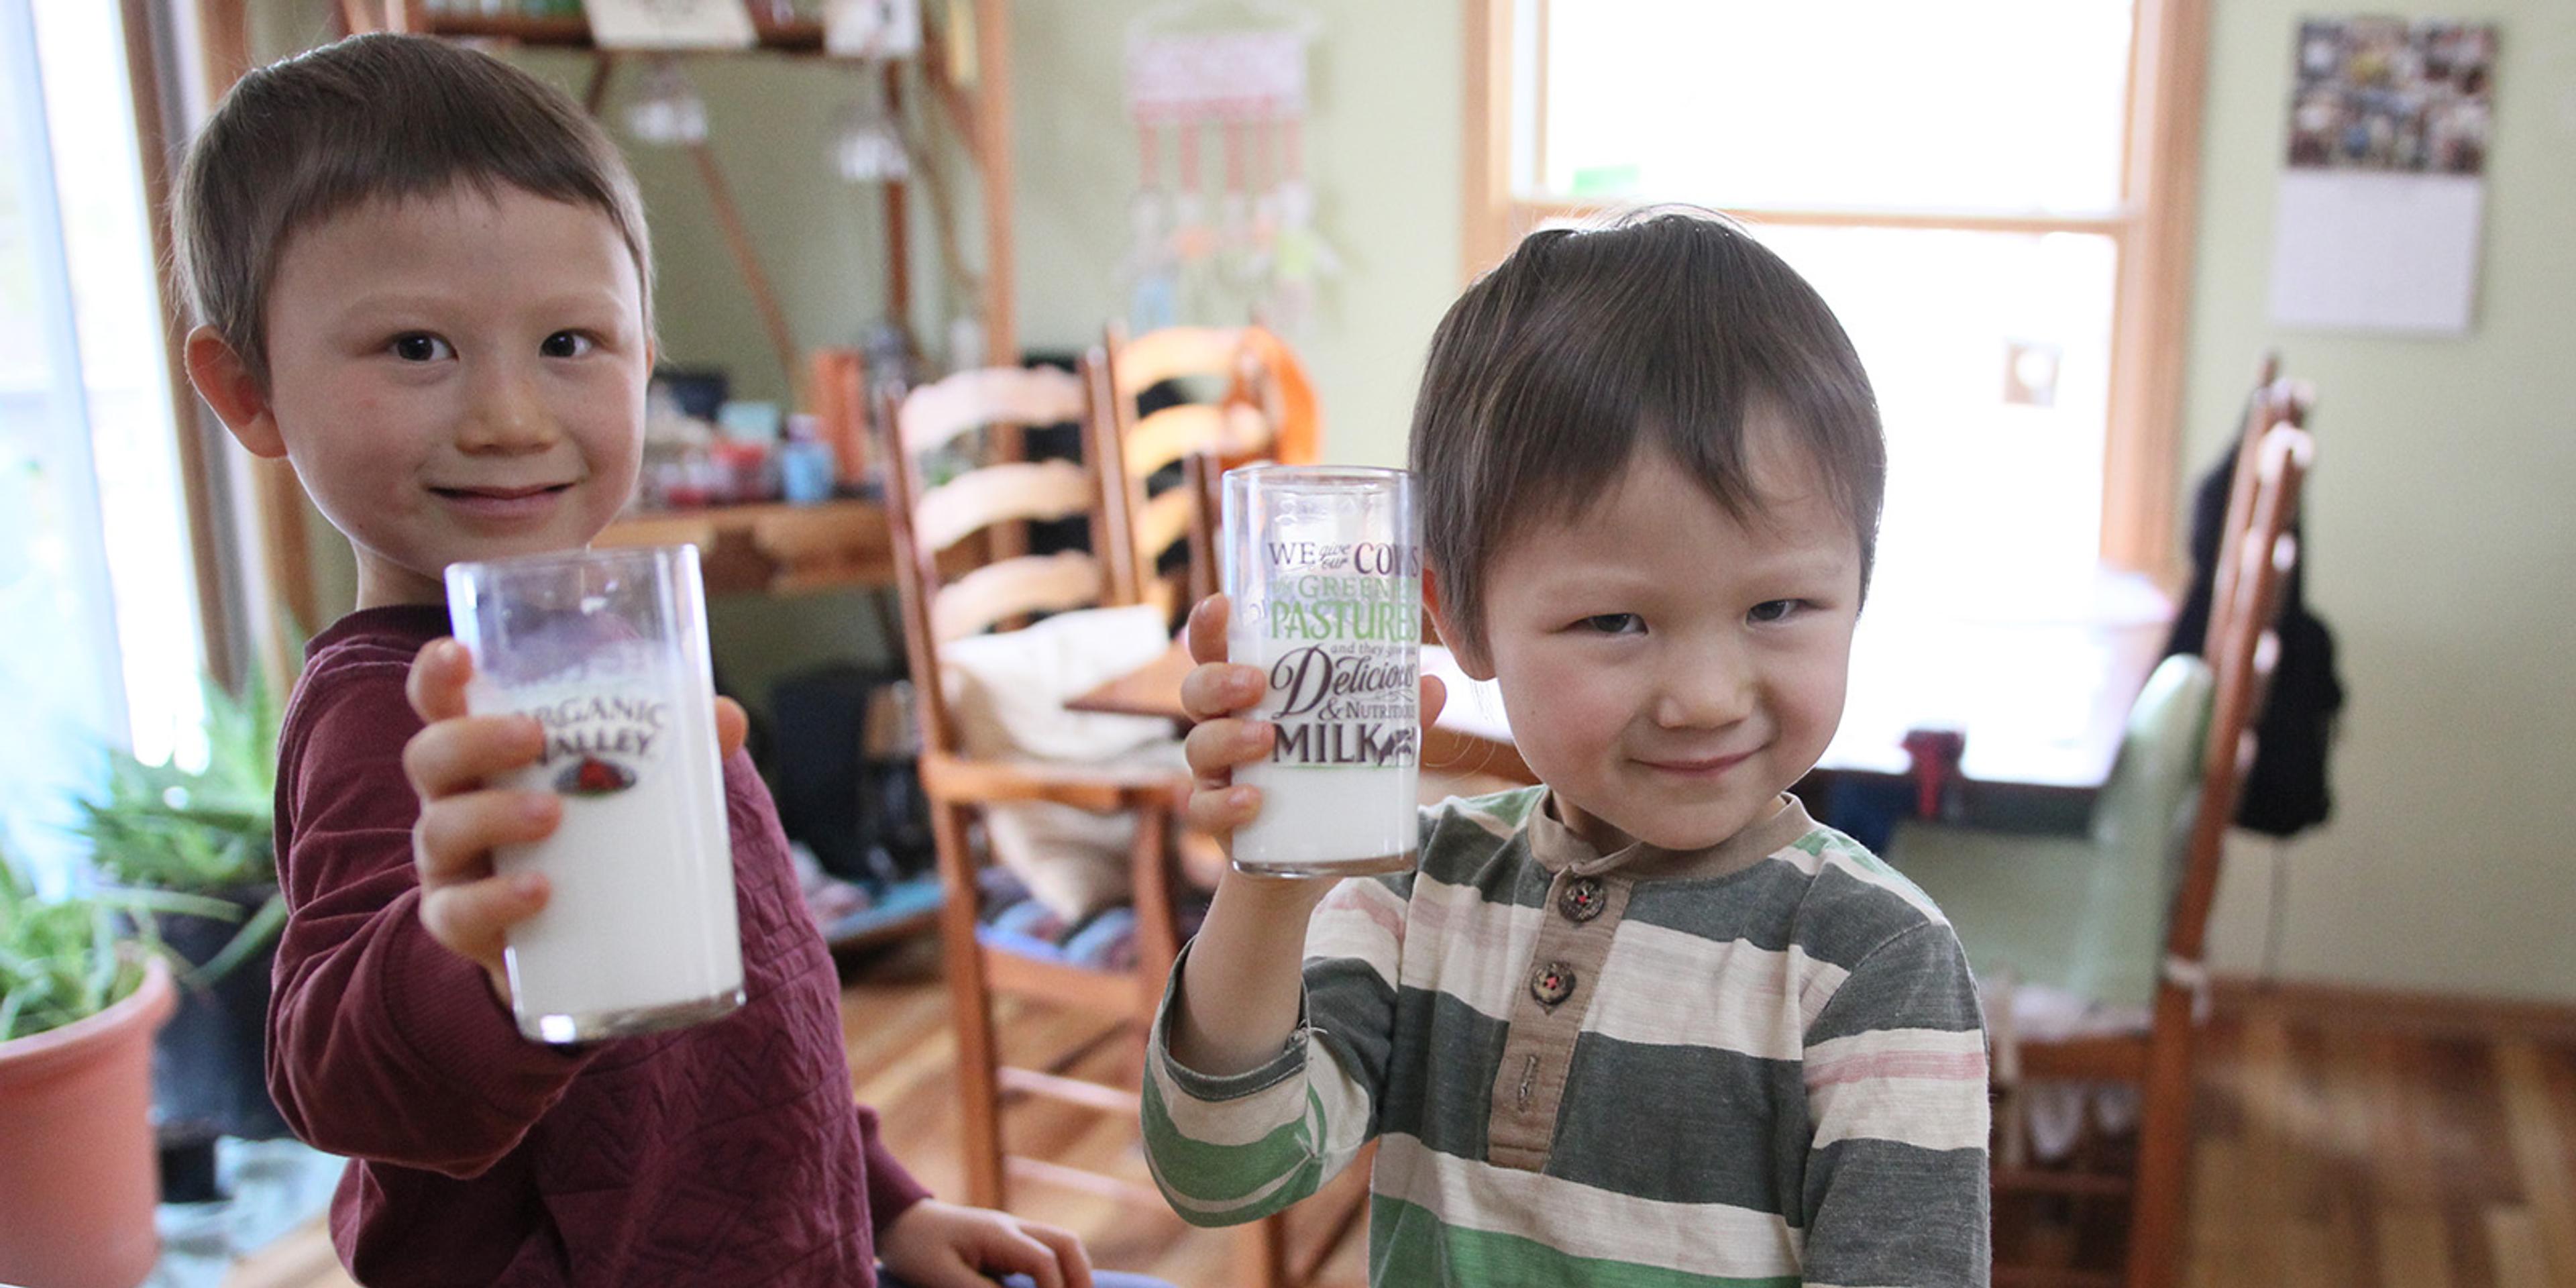 Two young boys drink Organic Valley milk.